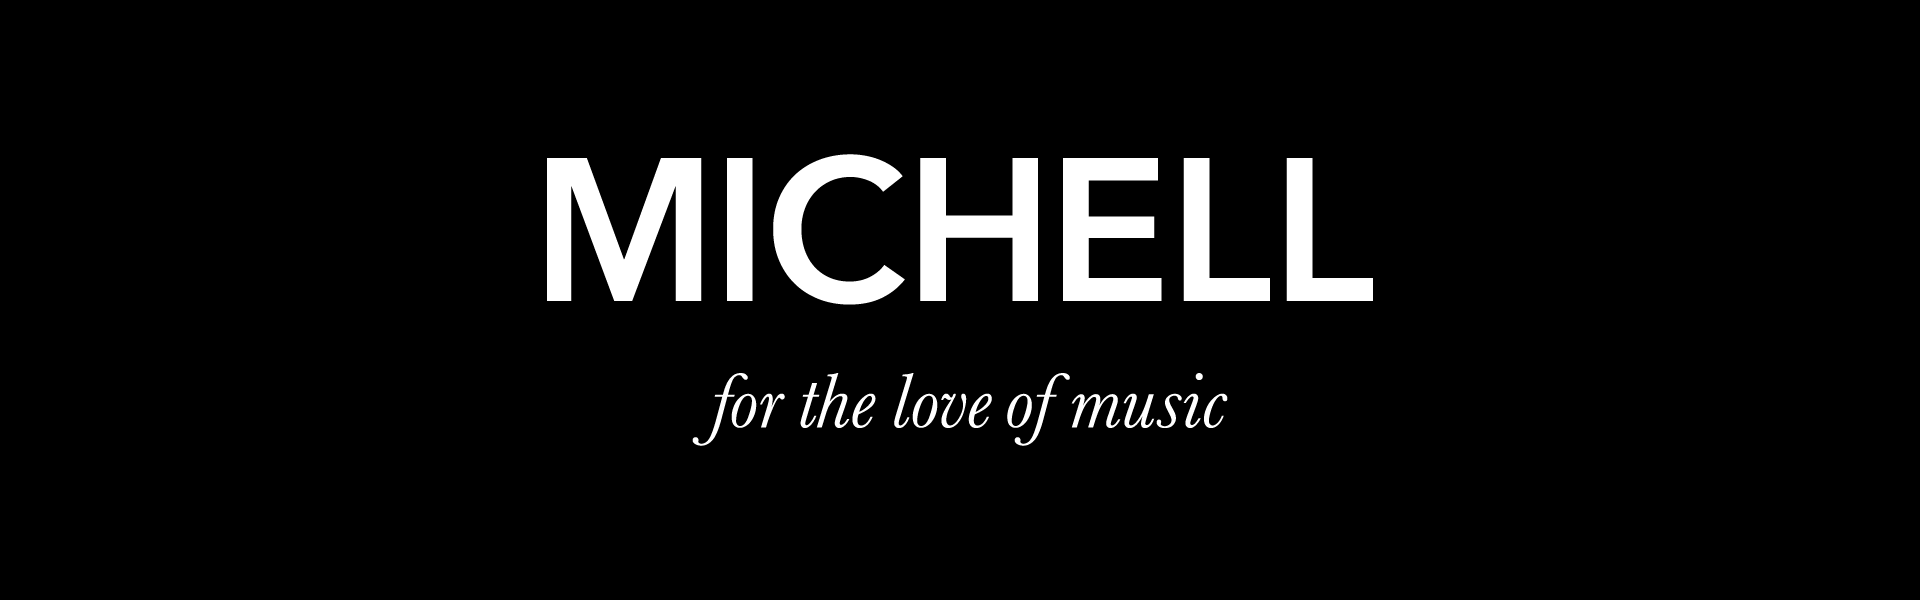 a black background with white text that says michell for the love of music